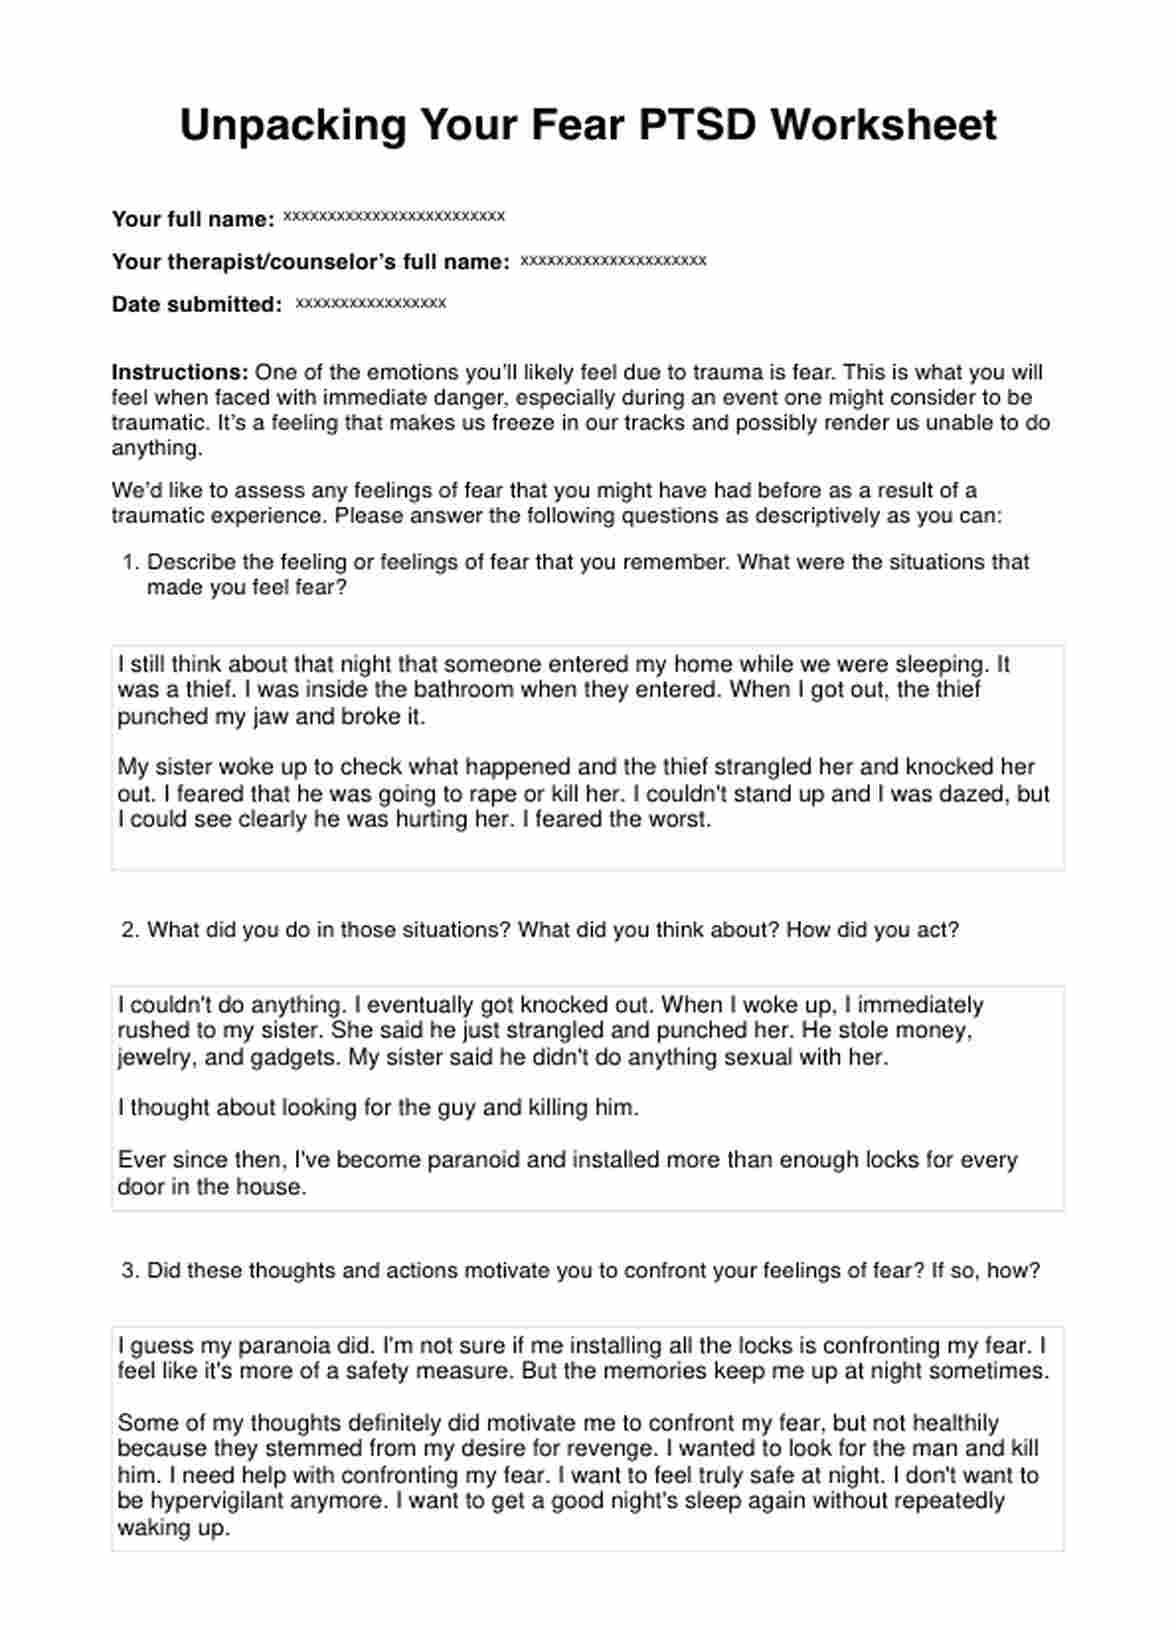 Unpacking Your Fear PTSD Worksheet PDF Example